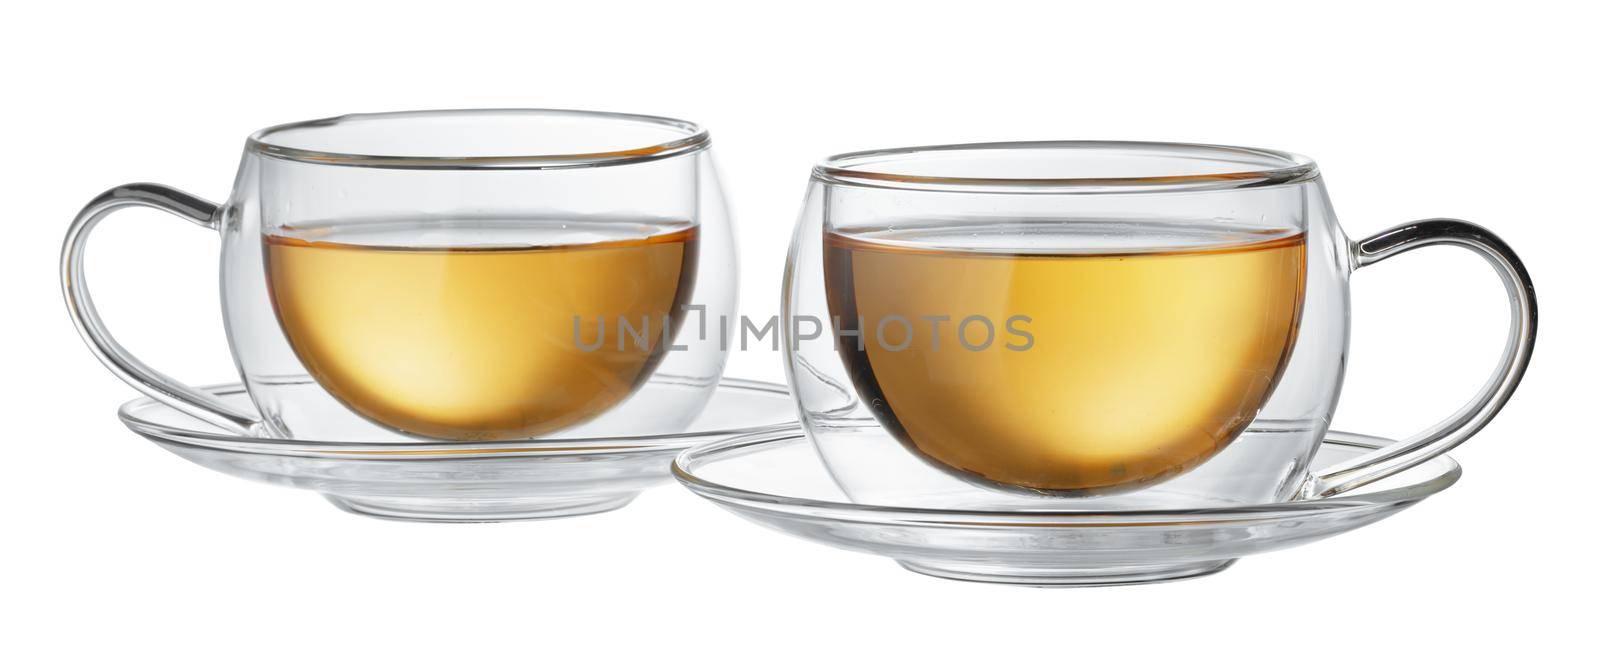 Two glass cups of tea isolated on white background